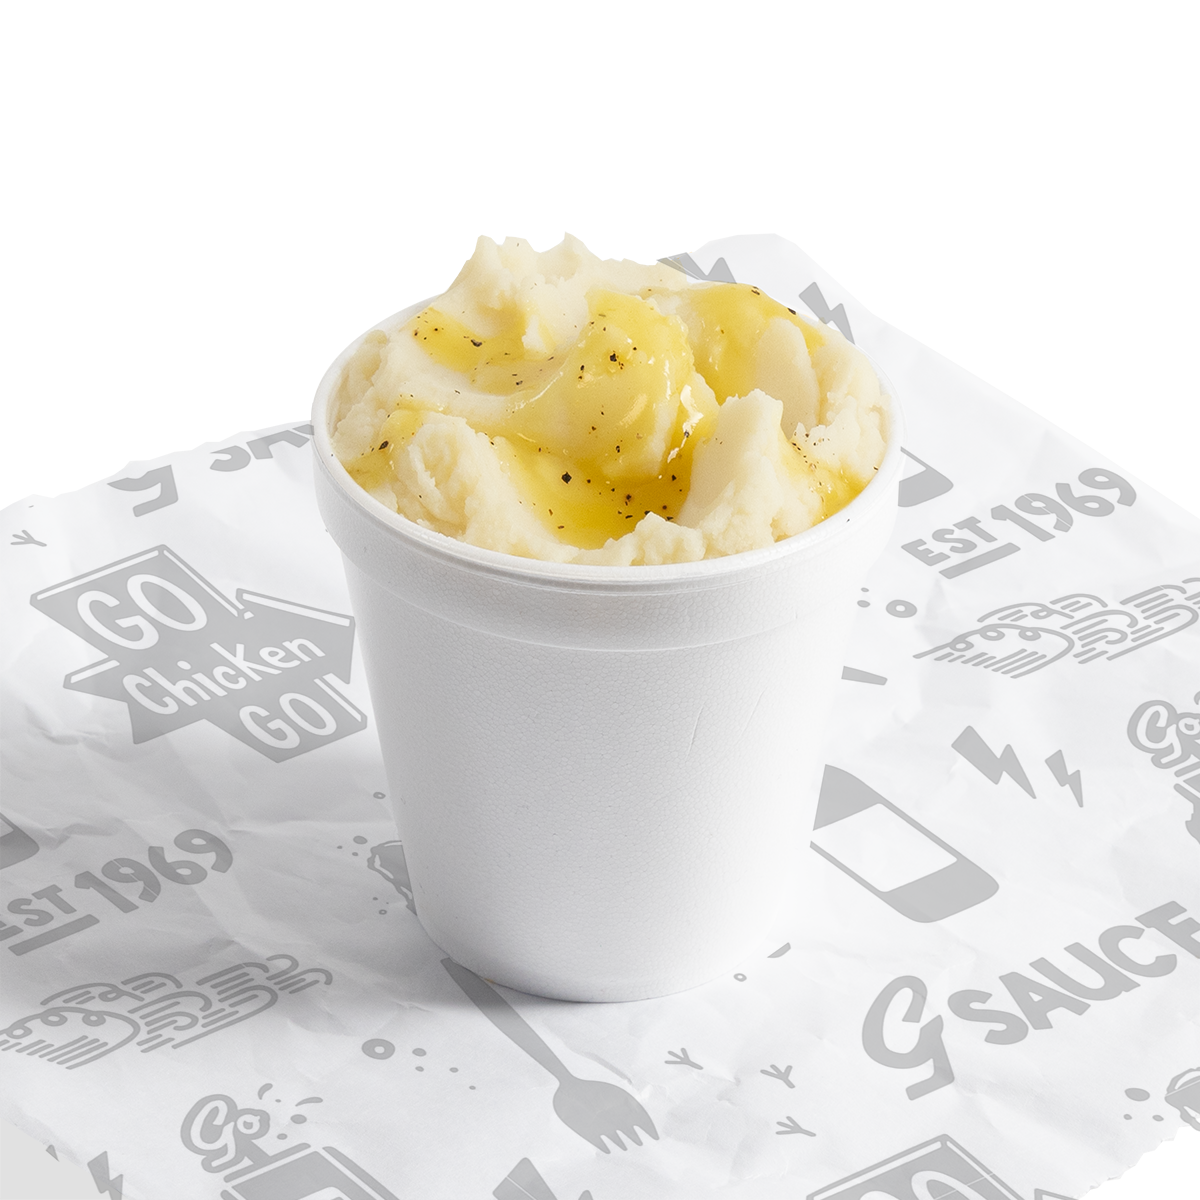 A pint of mashed potatoes with gravy